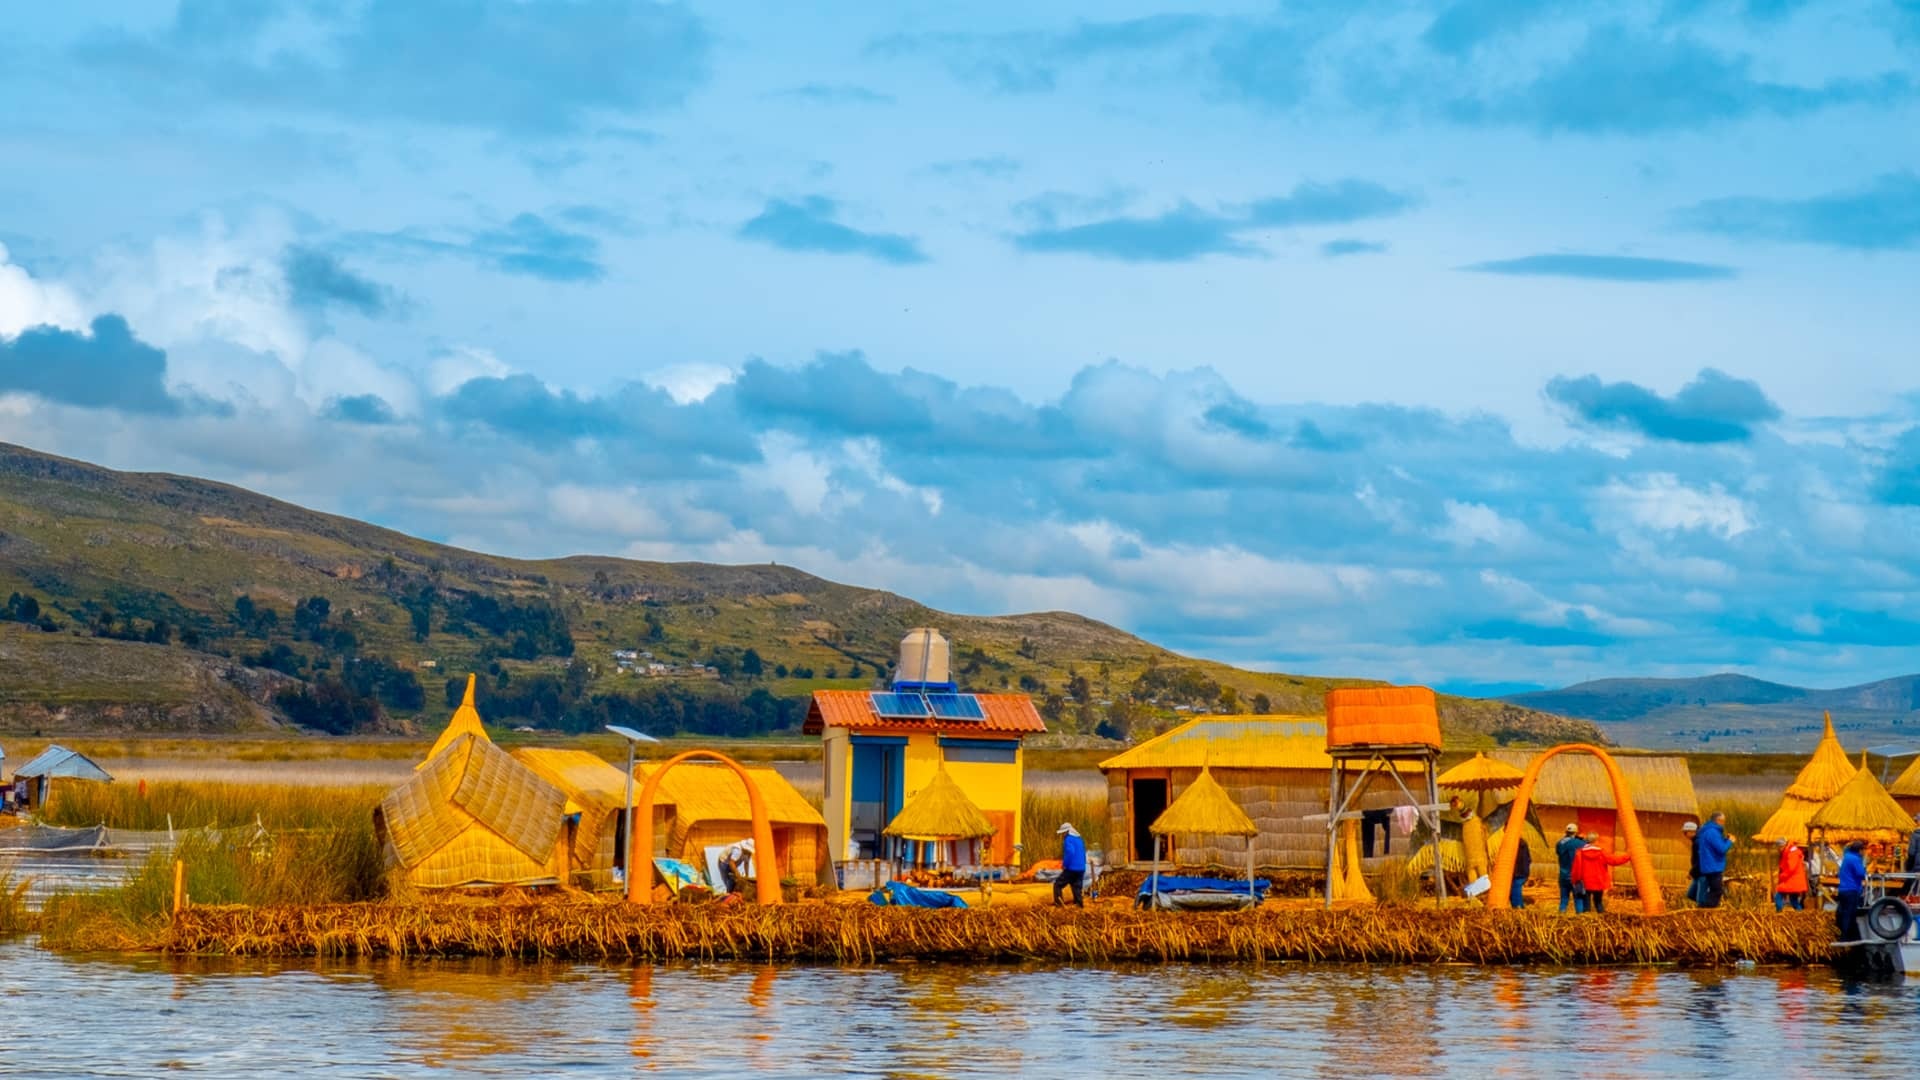 Uros Taquile islands tour, Titicaca Lake, Speed boat, Cultural heritage, 1920x1080 Full HD Desktop